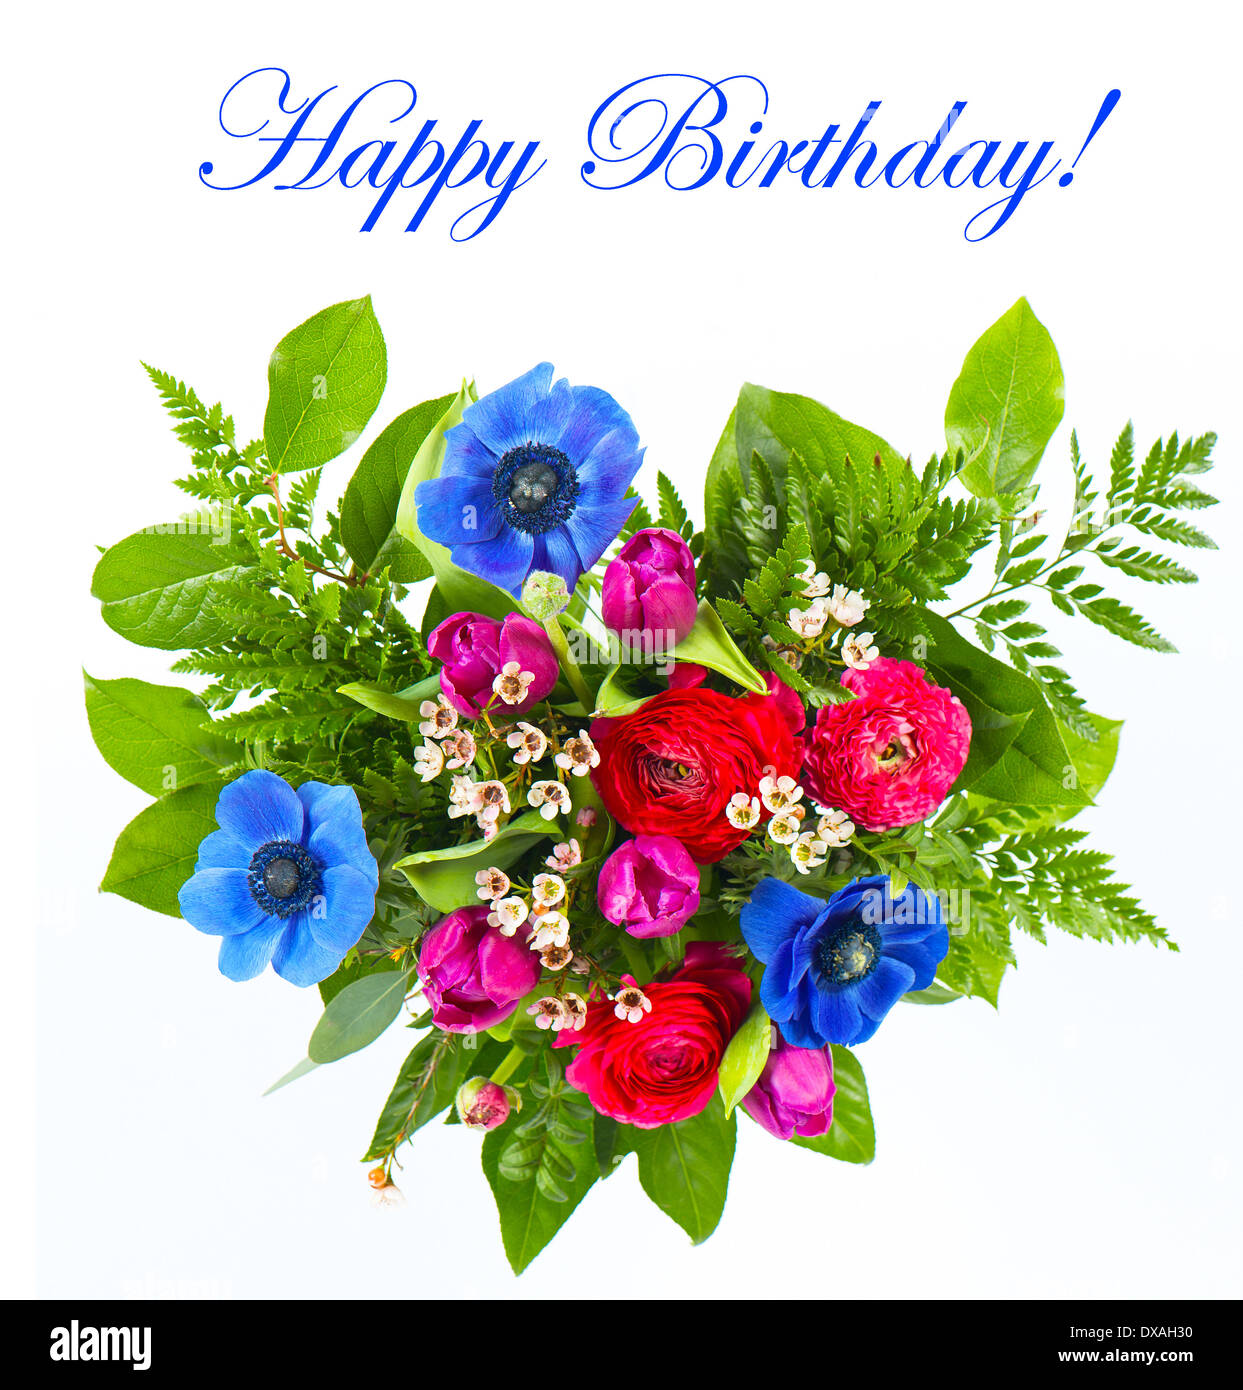 Outstanding Collection of over 999 flower bouquet images for birthday ...